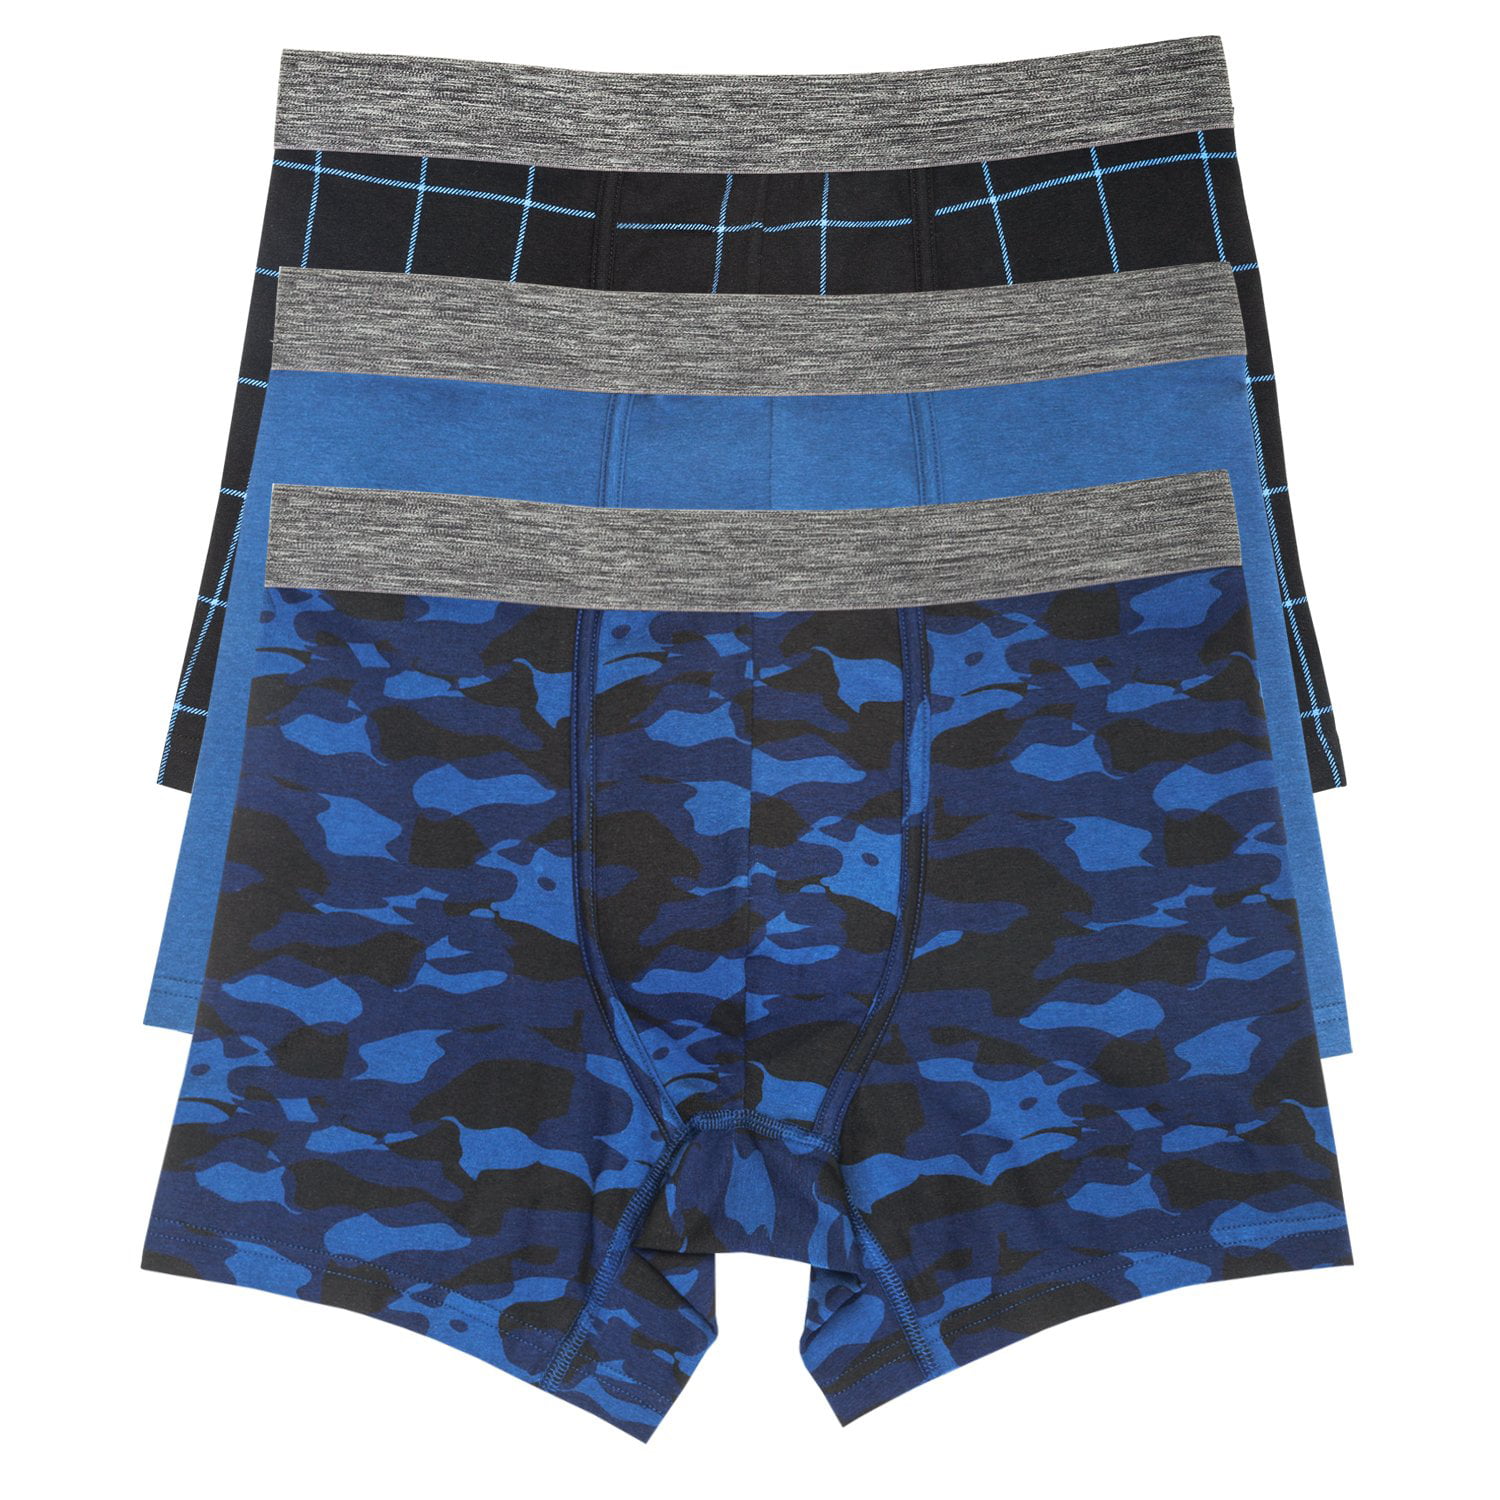 Basic Outfitter's Mens Plaid Boxer Brief 3 Pack - Walmart.com